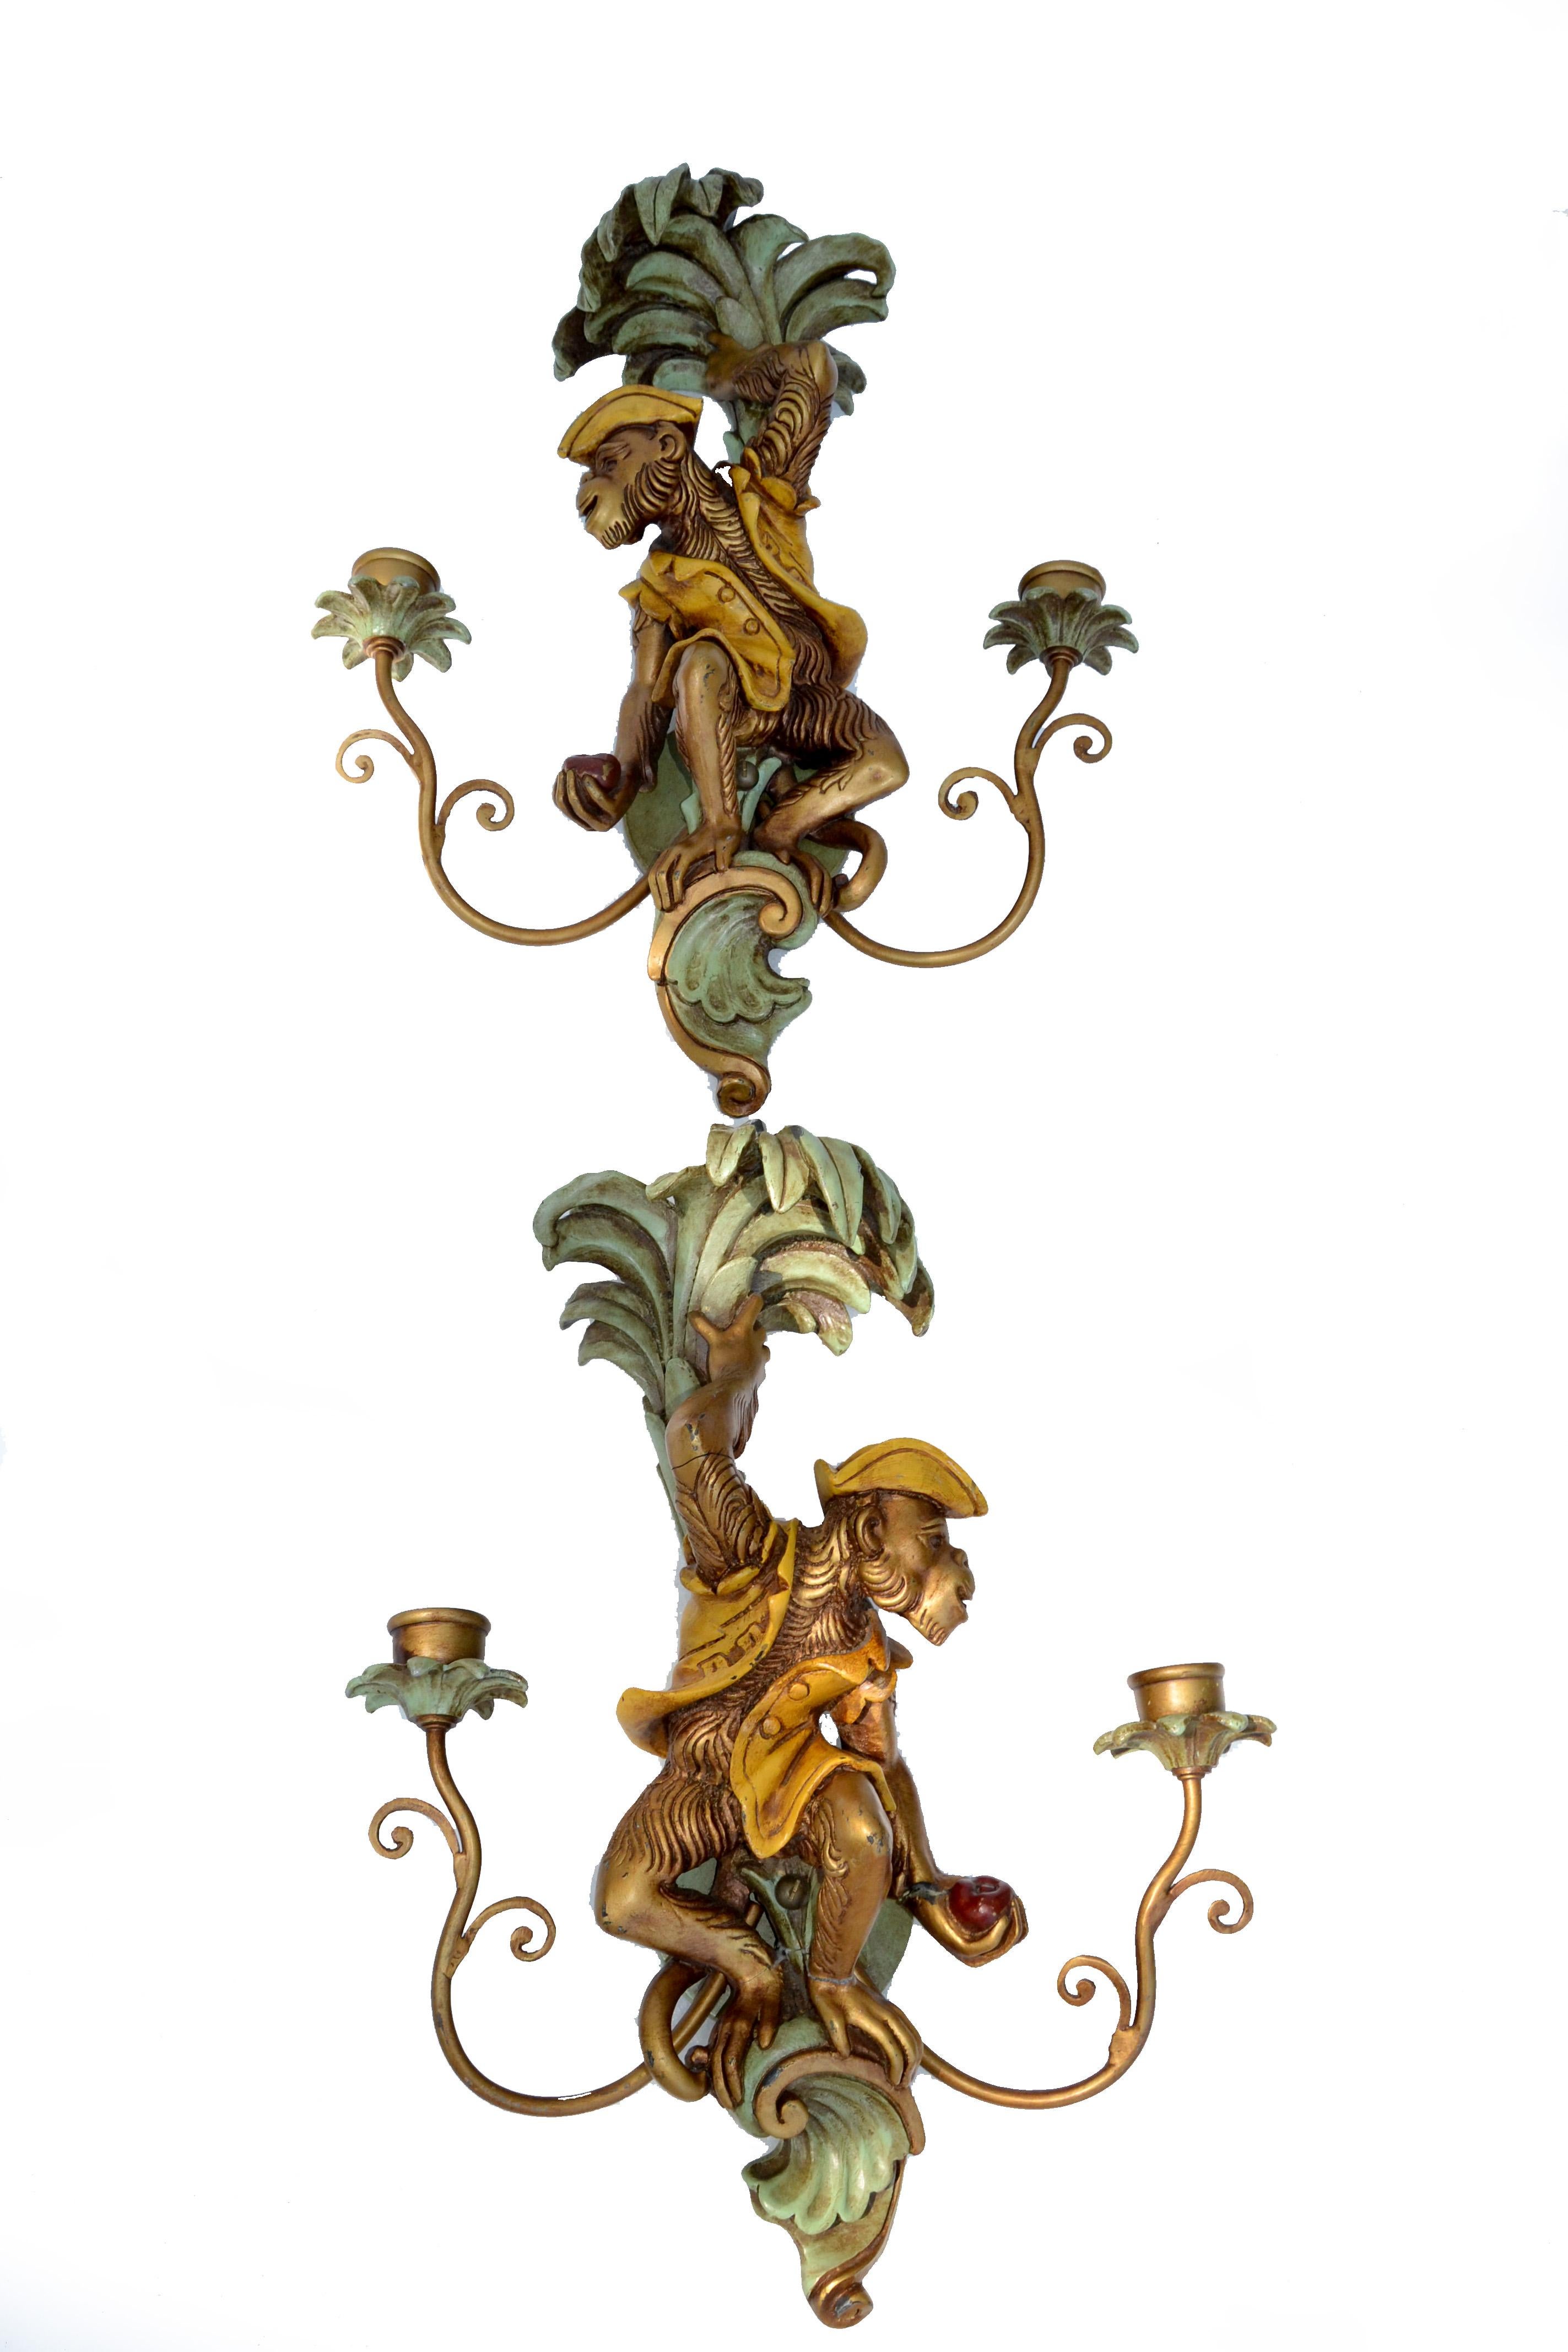 One of a Kind pair of non-electrified 2 candles hand-carved wood Sconces depicting a Monkey holding onto a Palm Tree and having a red Apple in his hand. 
Each Sconce is the exact Mirror Image of each other. Great Animal Sculptures.
Round Back